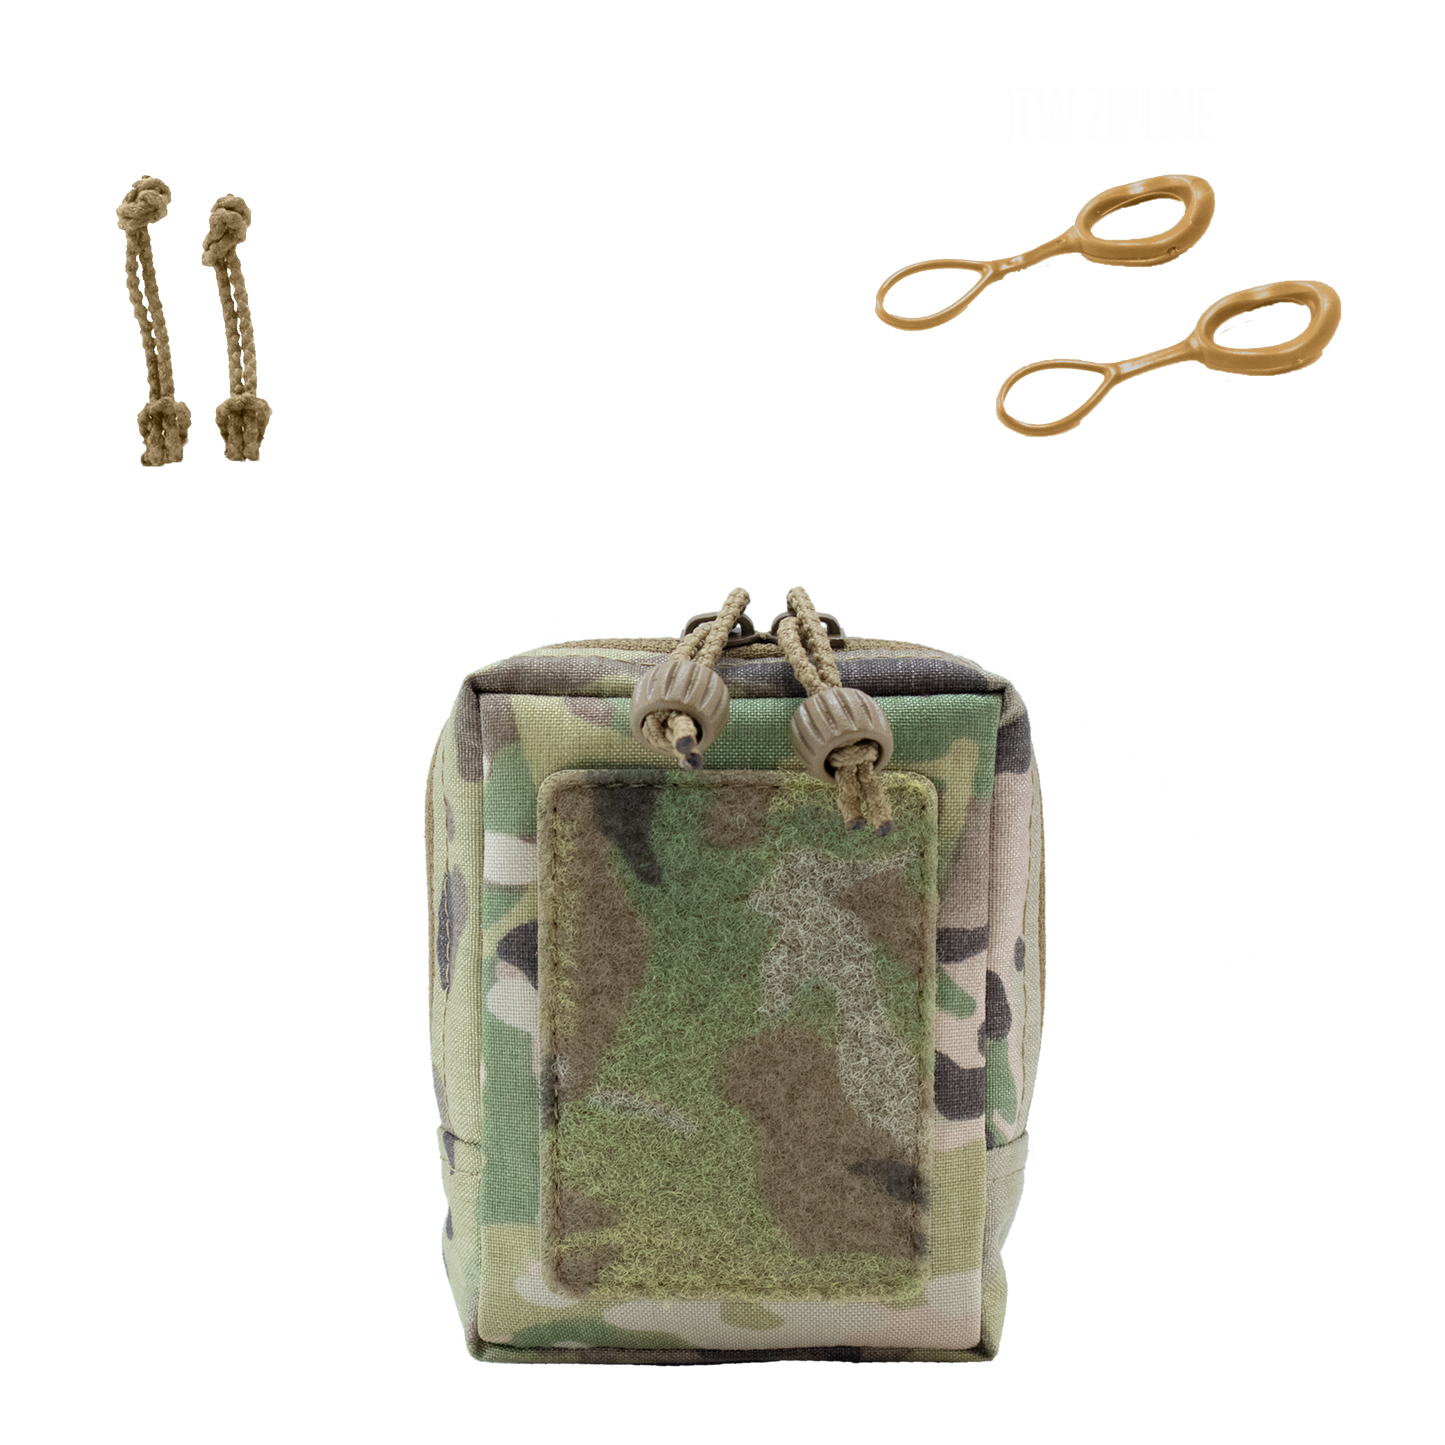 General Purpose Pouch